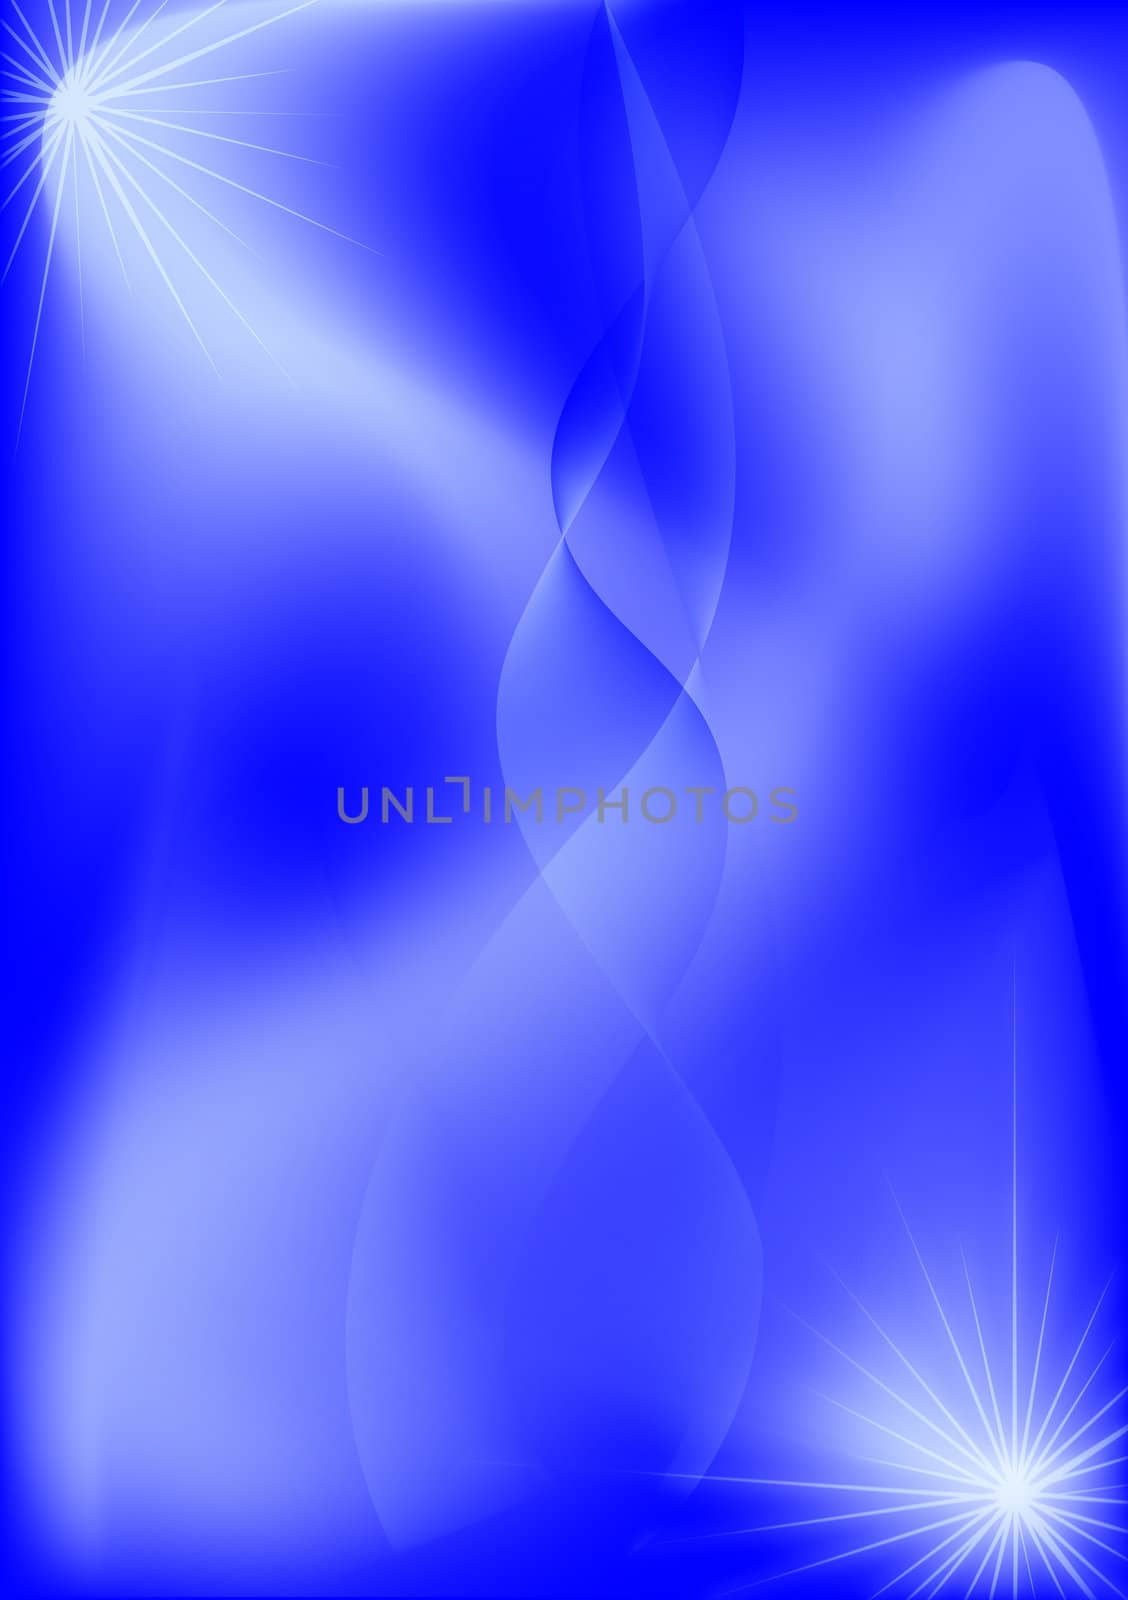 Abstraction. Wave and stars in blue space